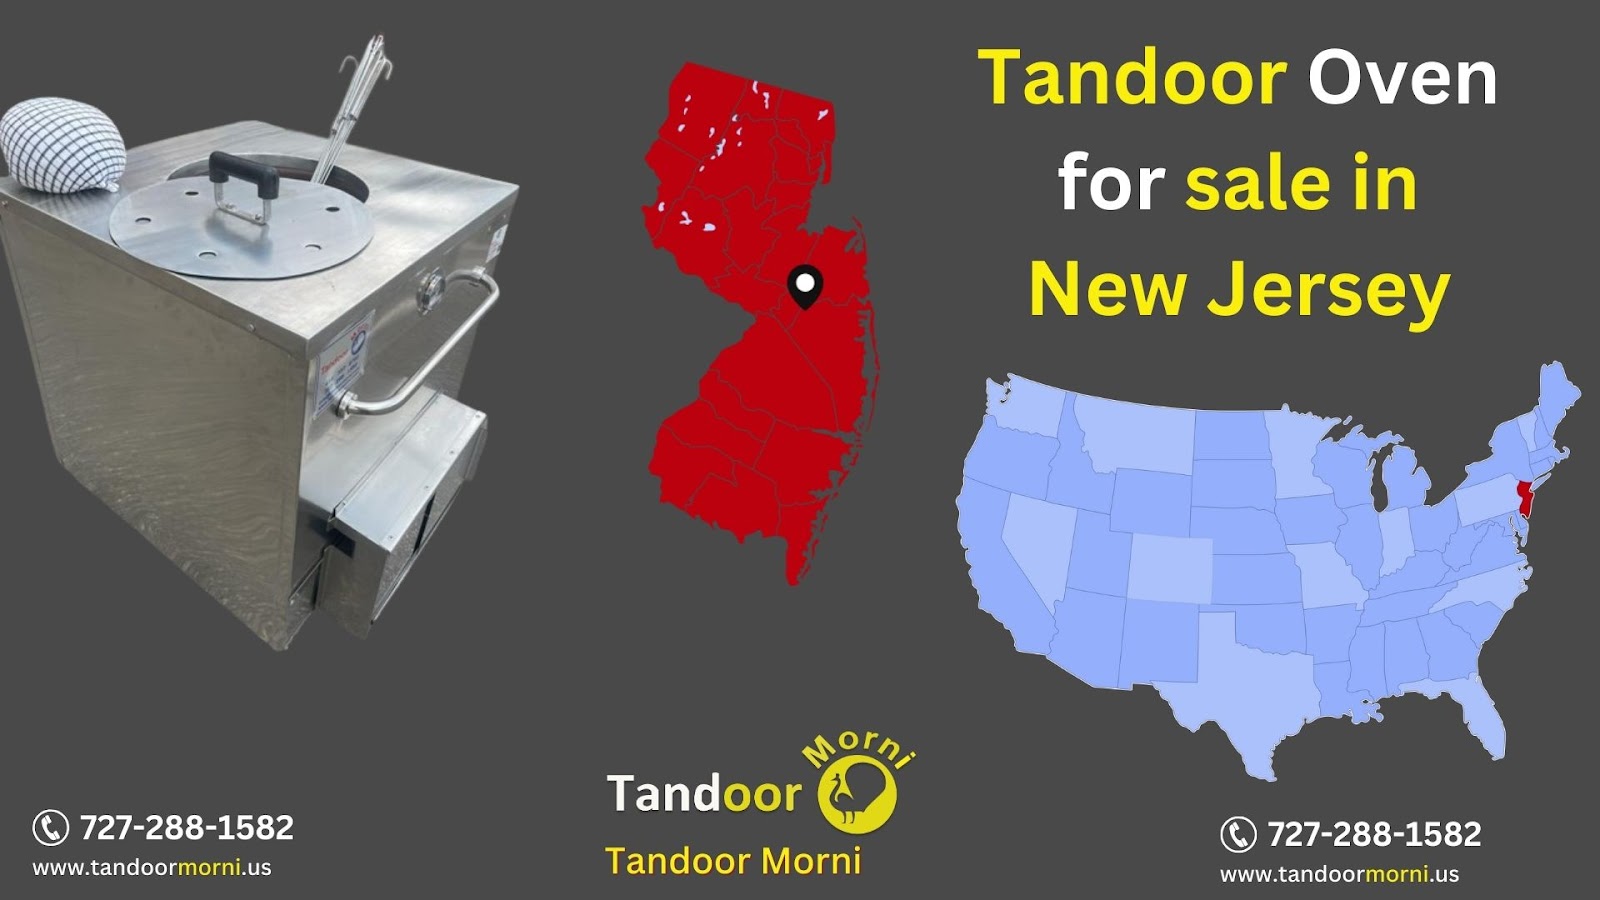 In New Jersey, Tandoor Morni provides tandoori oven for sale.
With a warehouse and office in New Jersey, Tandoor Morni makes tandoor ovens for restaurants and homes easily accessible.